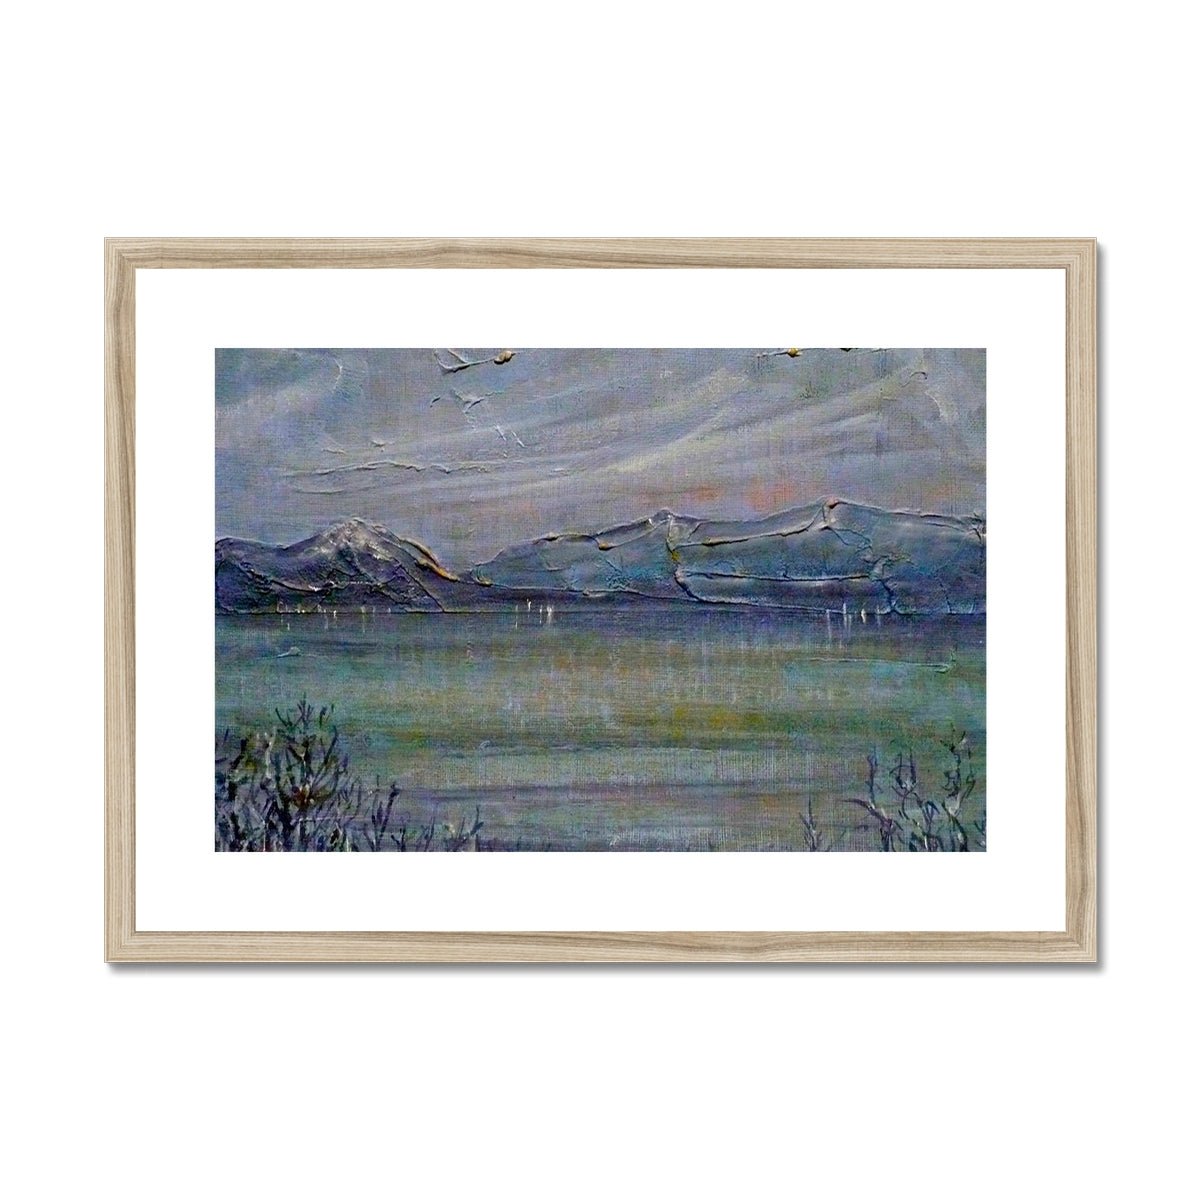 Loch Morlich Moonlight Painting | Framed & Mounted Prints From Scotland-Framed & Mounted Prints-Scottish Lochs & Mountains Art Gallery-A2 Landscape-Natural Frame-Paintings, Prints, Homeware, Art Gifts From Scotland By Scottish Artist Kevin Hunter